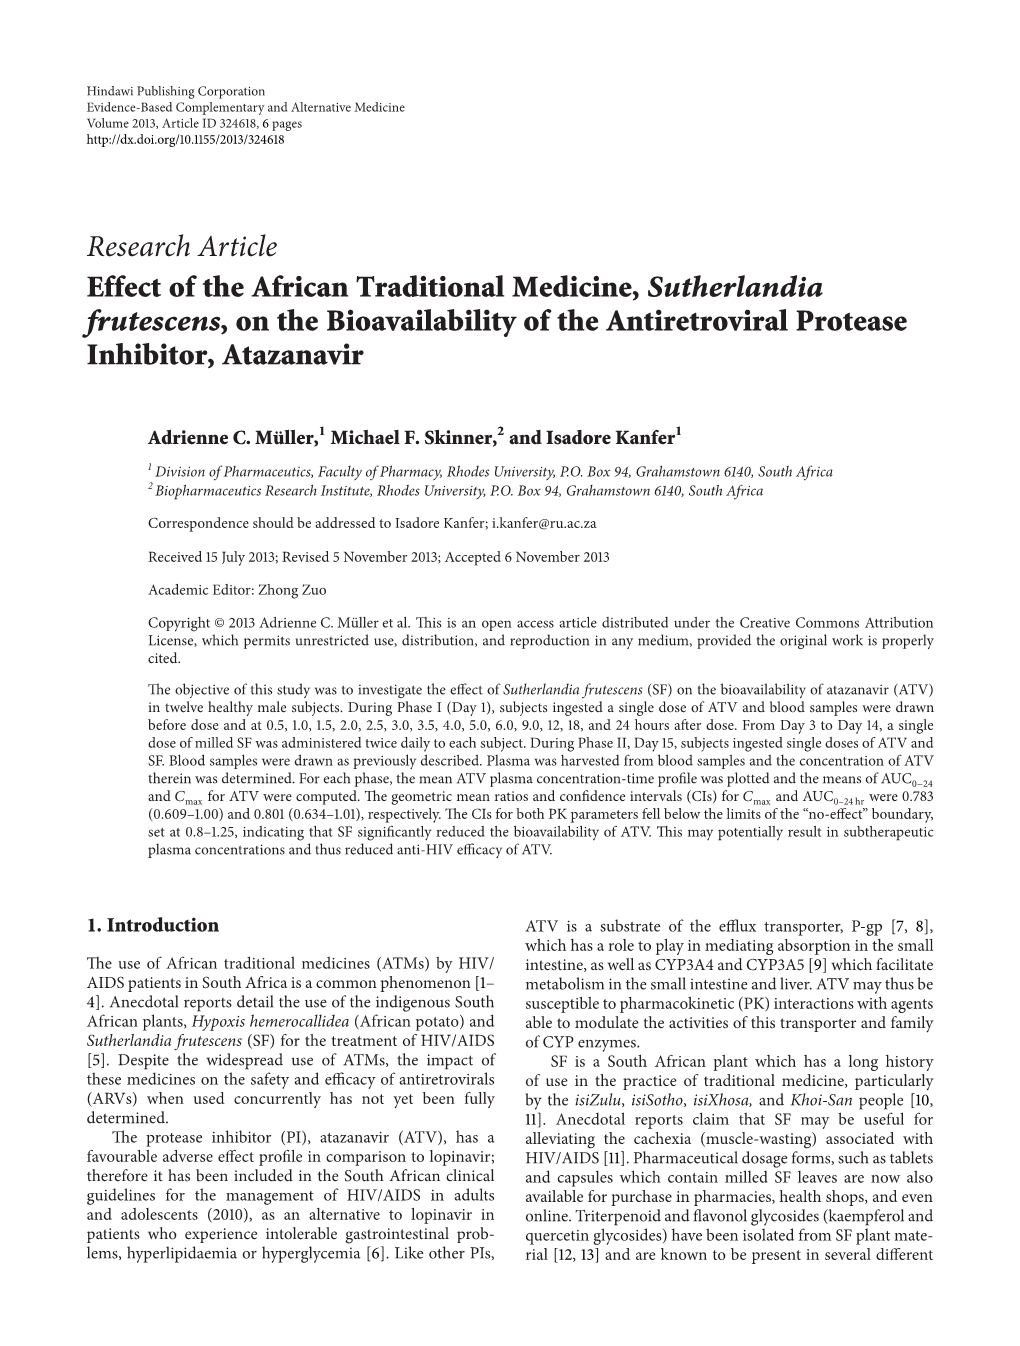 Effect of the African Traditional Medicine, Sutherlandia Frutescens, on the Bioavailability of the Antiretroviral Protease Inhibitor, Atazanavir